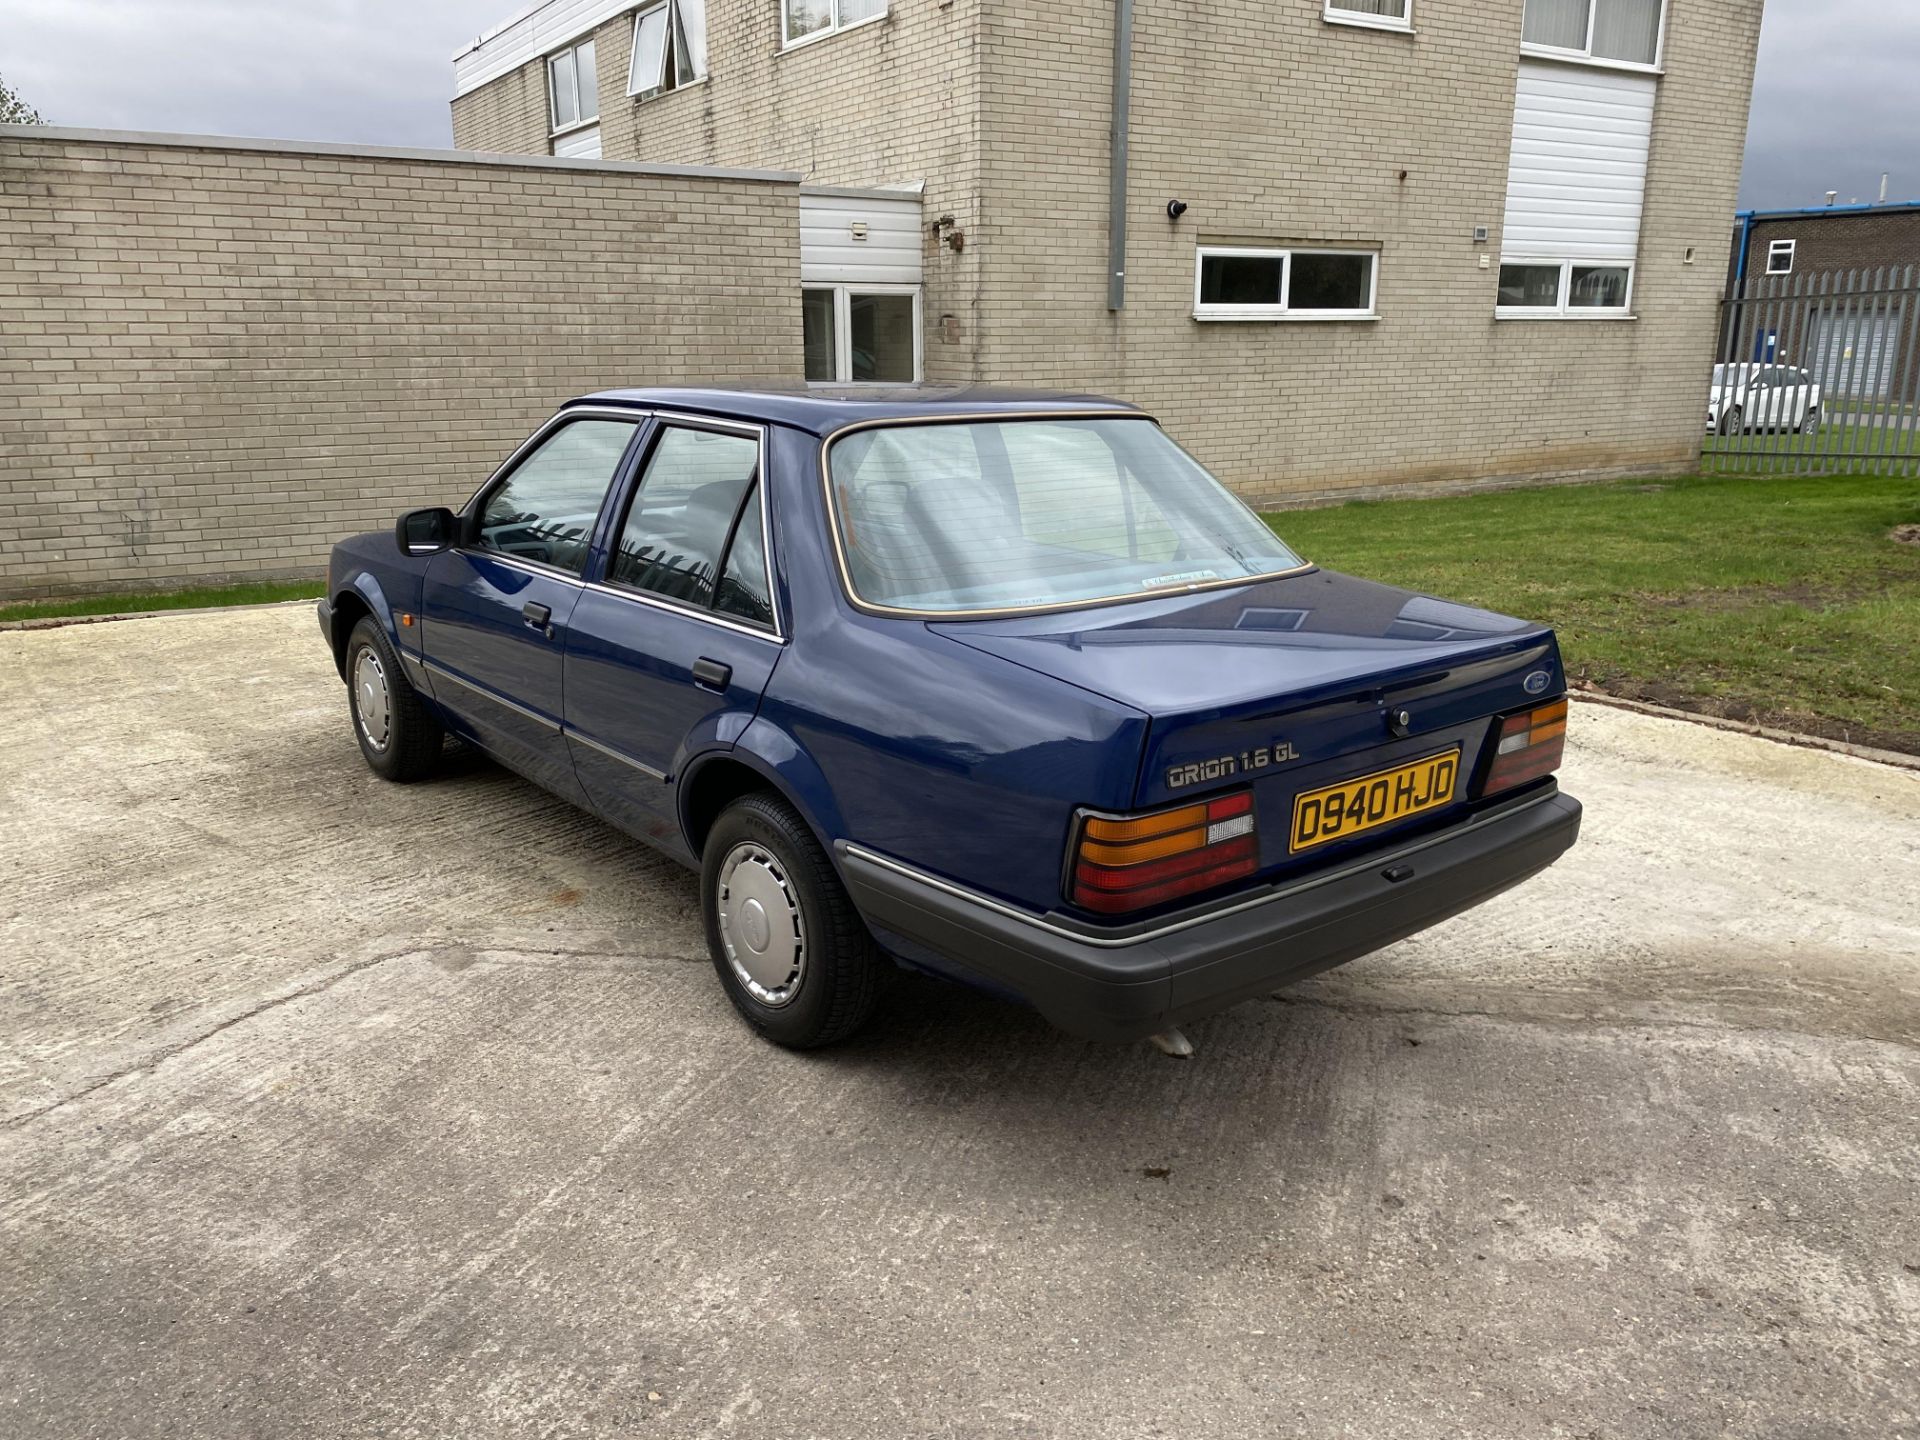 Ford Orion 1.6 GL - Image 6 of 42